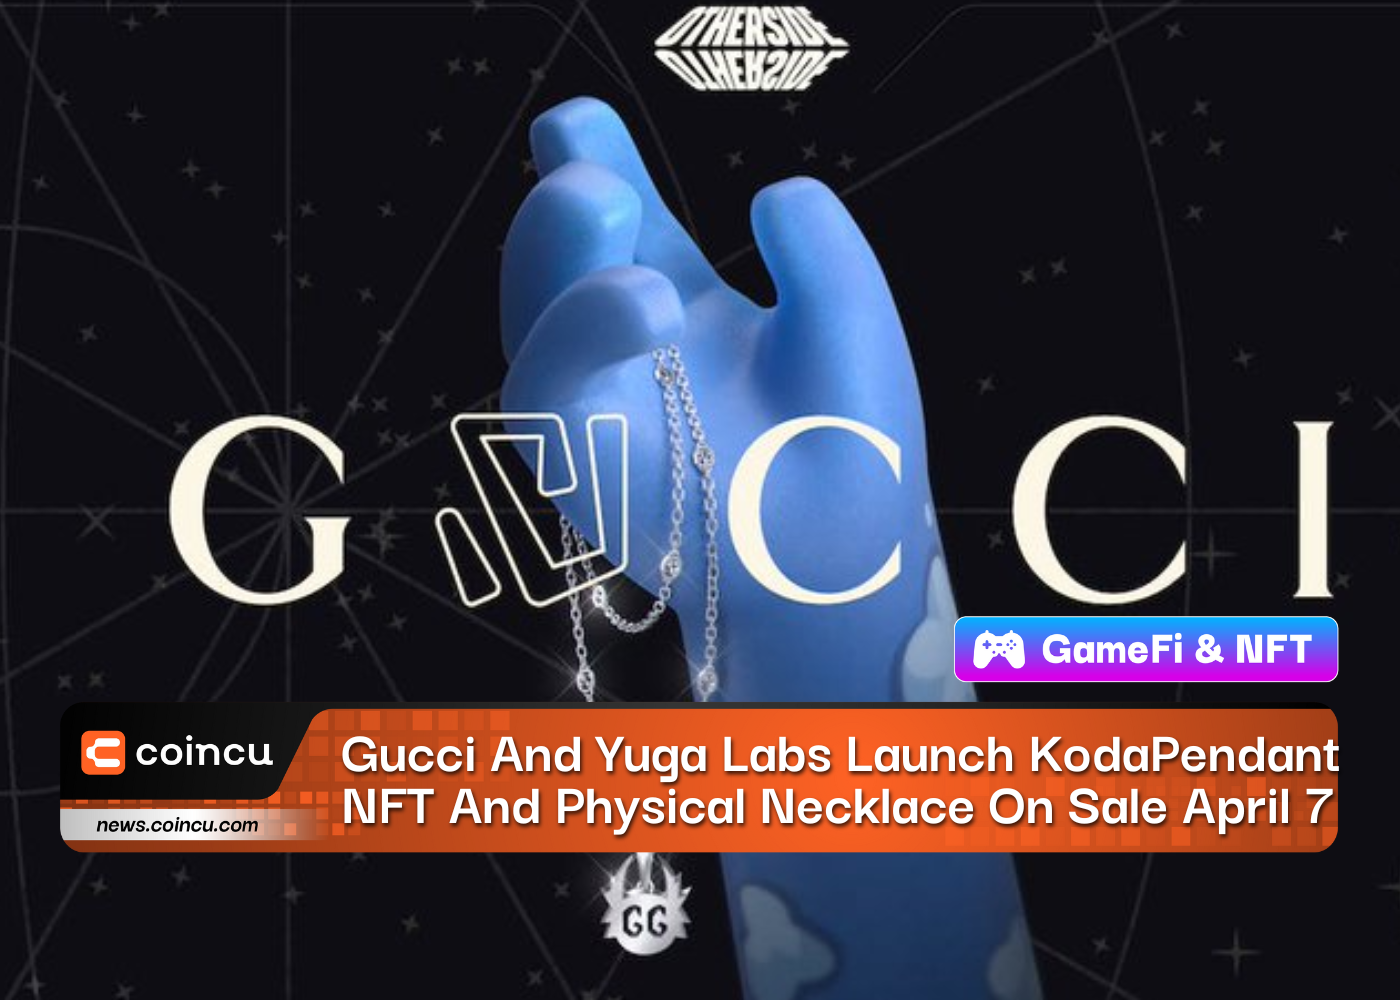 Gucci And Yuga Labs Launch KodaPendant NFT And Physical Necklace On Sale April 7